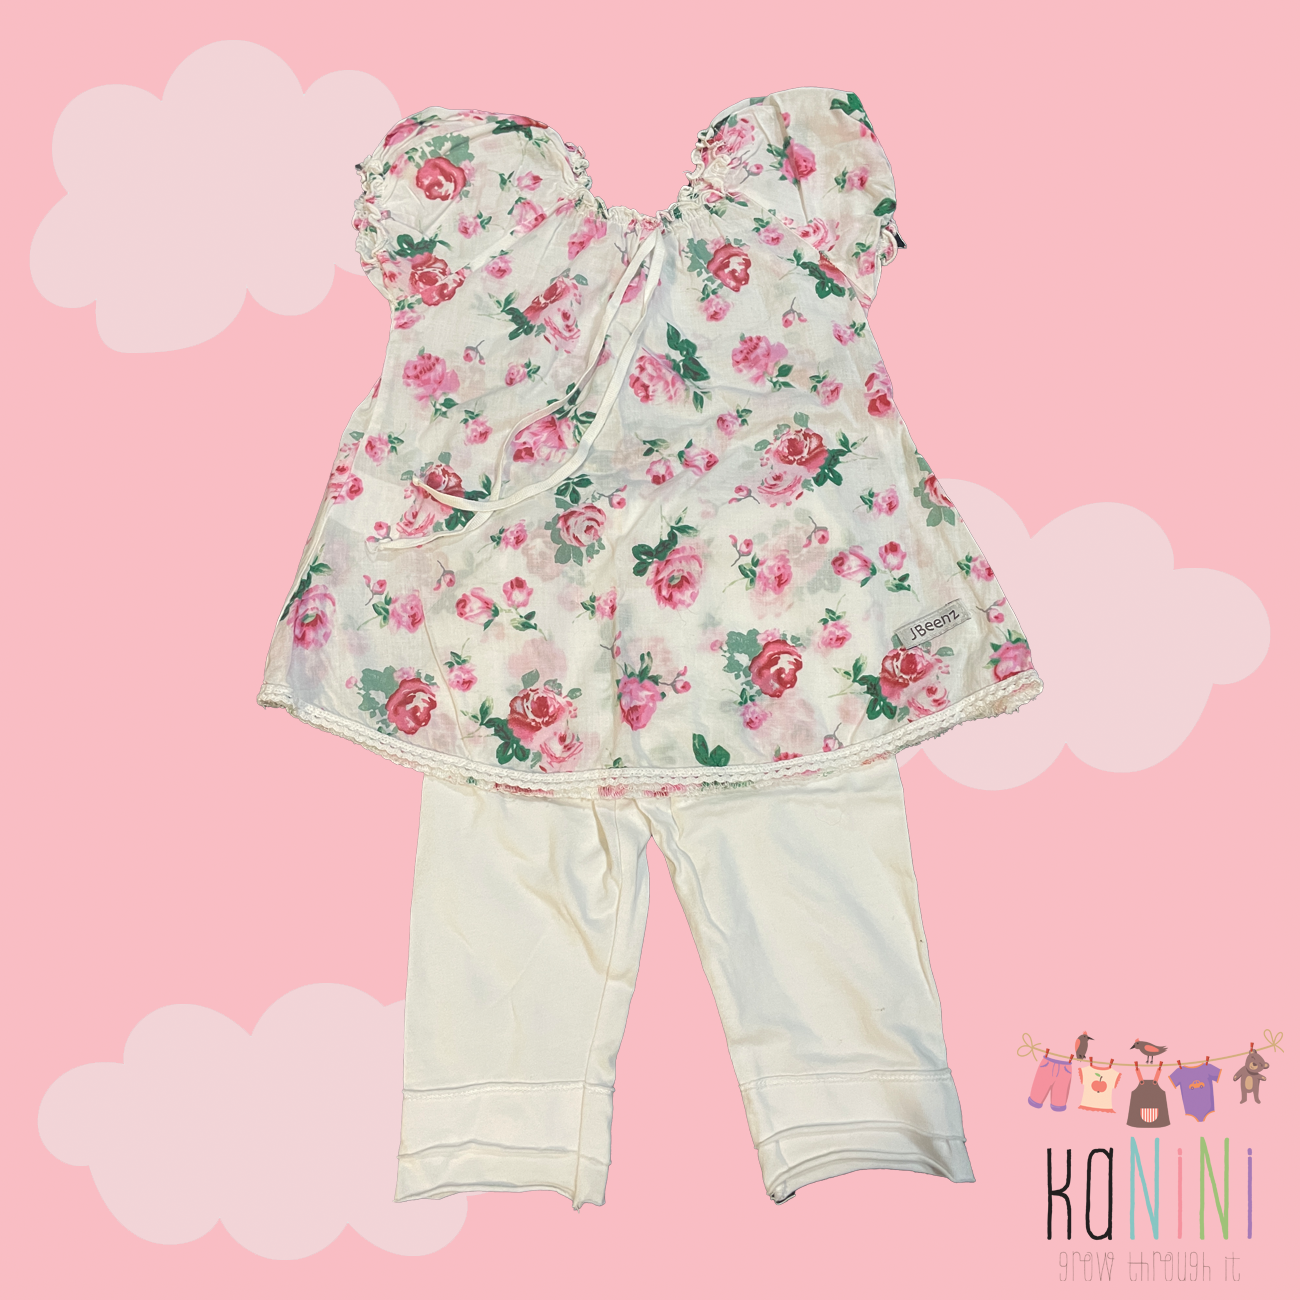 Featured image for “J Beenz 6 - 12 Months Girls Pink Rose Set”